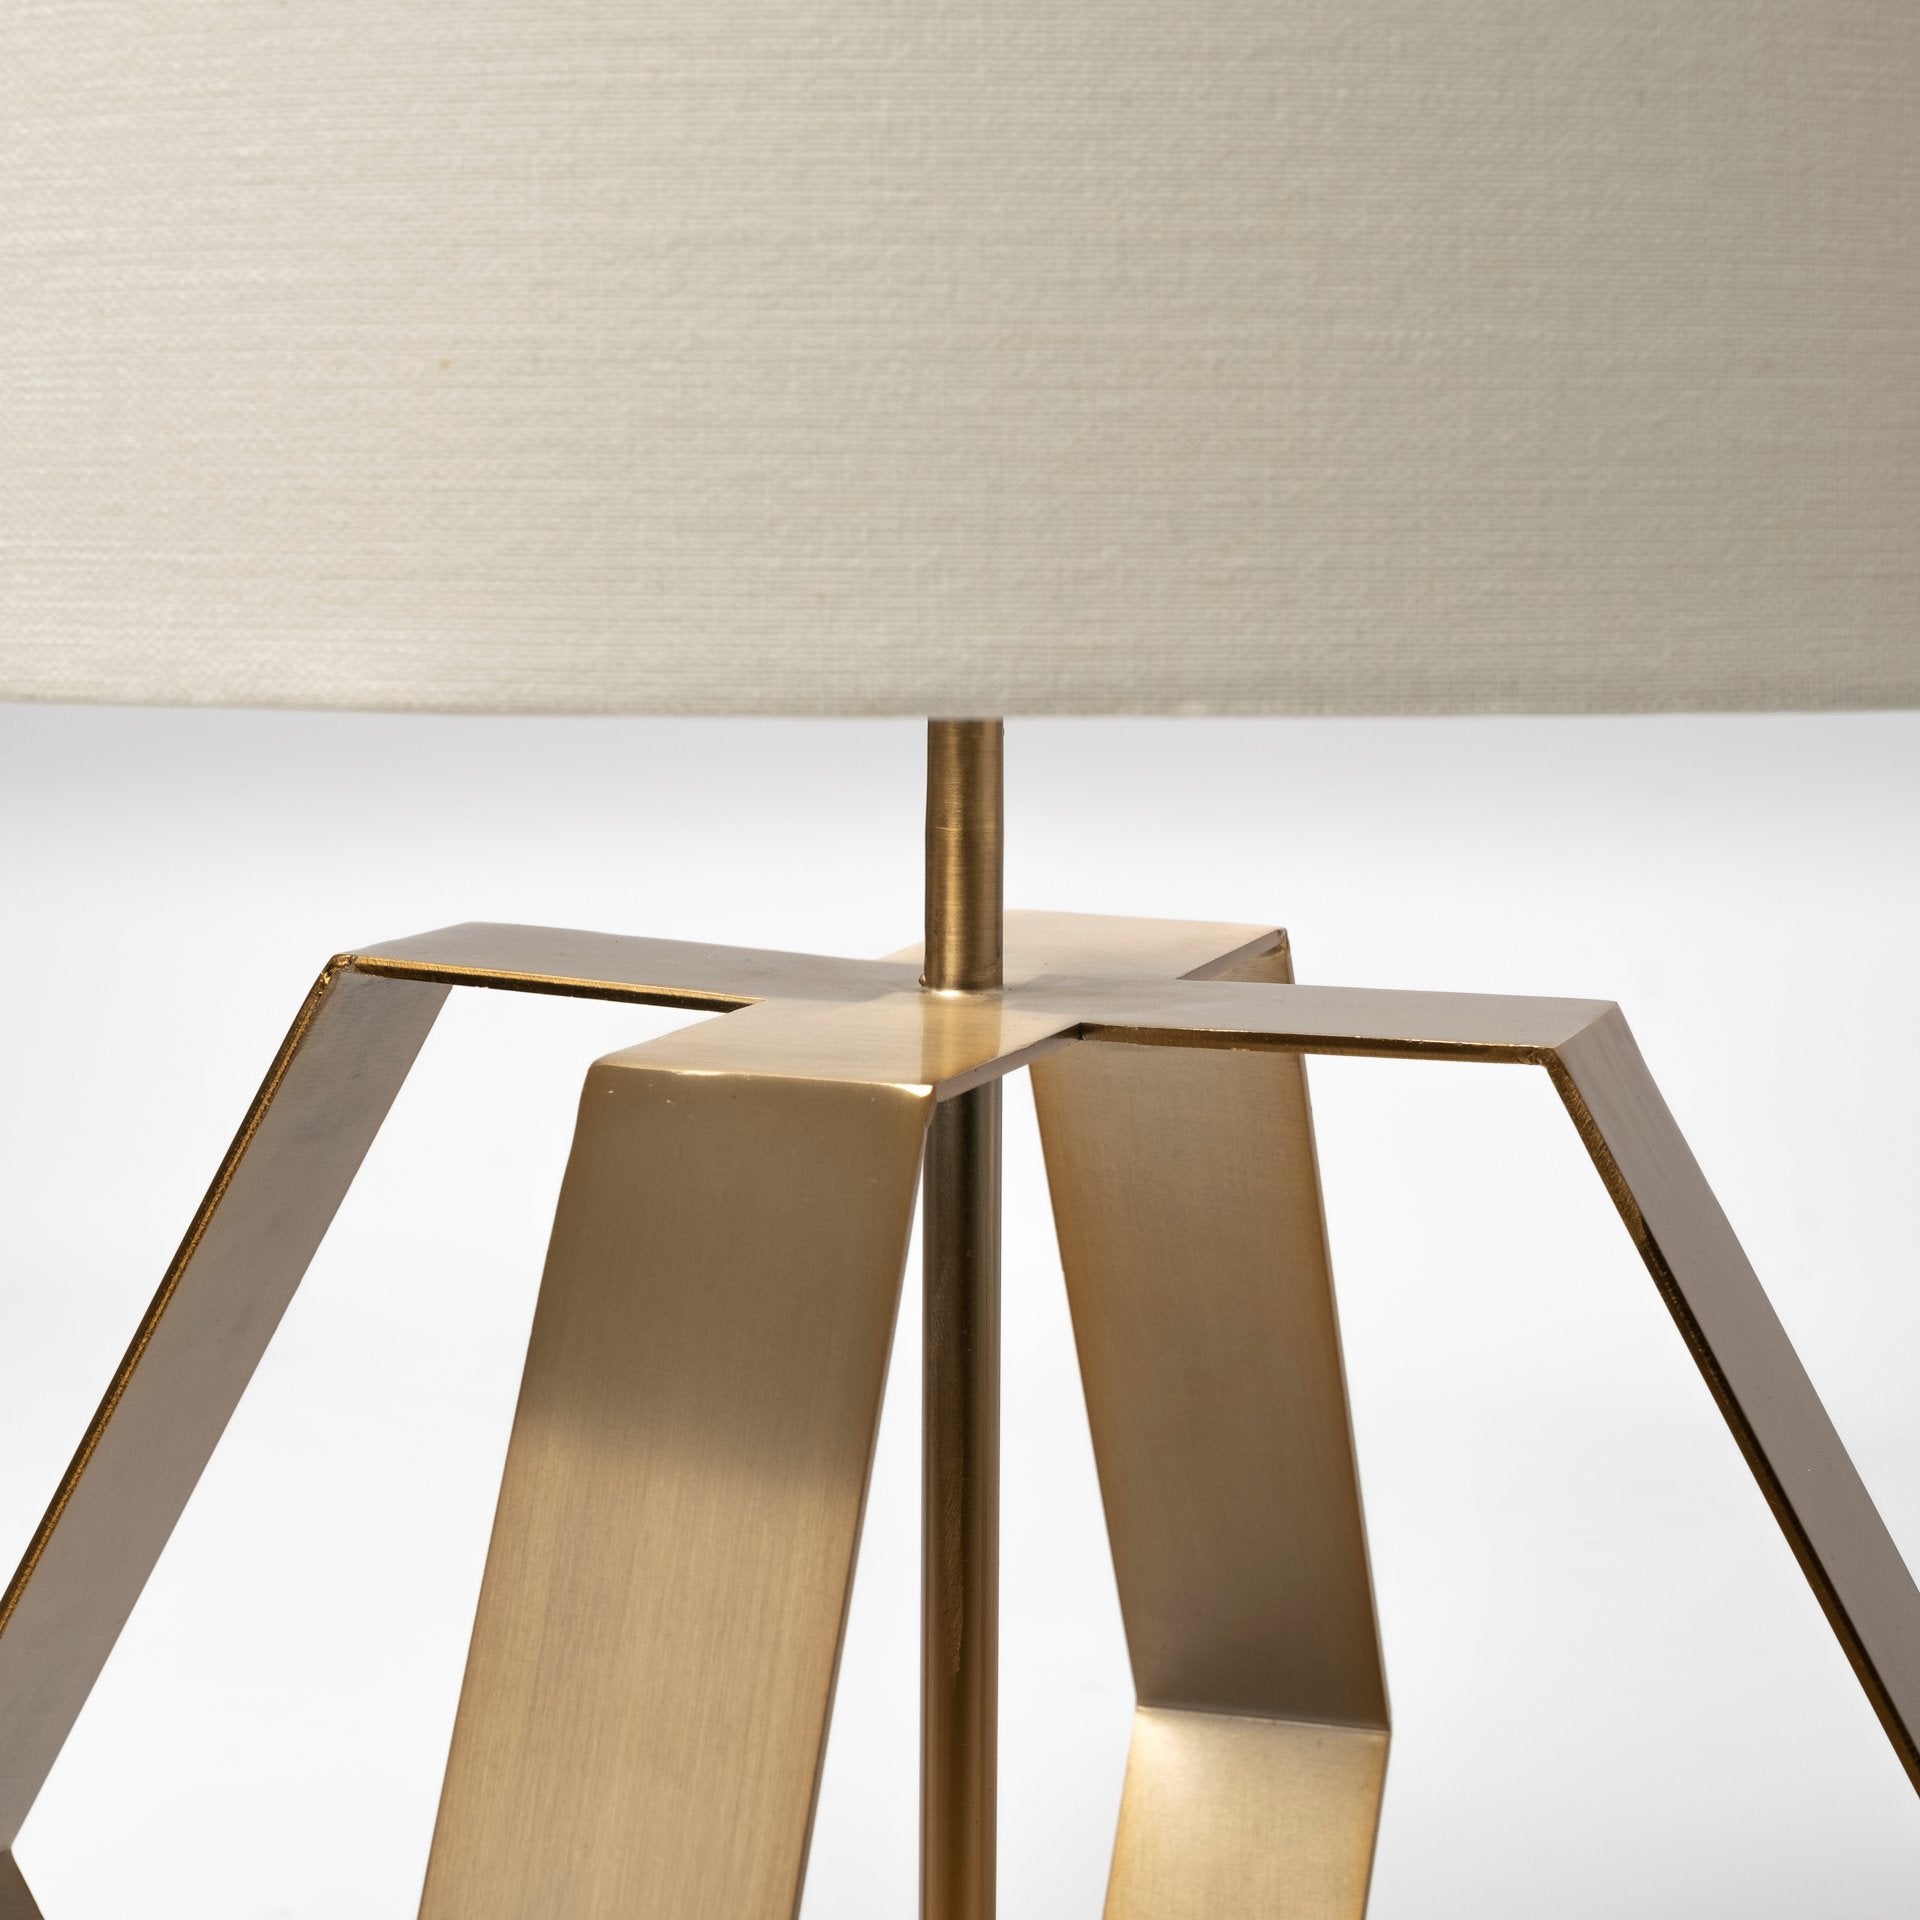 Edwards Gold Table Lamp